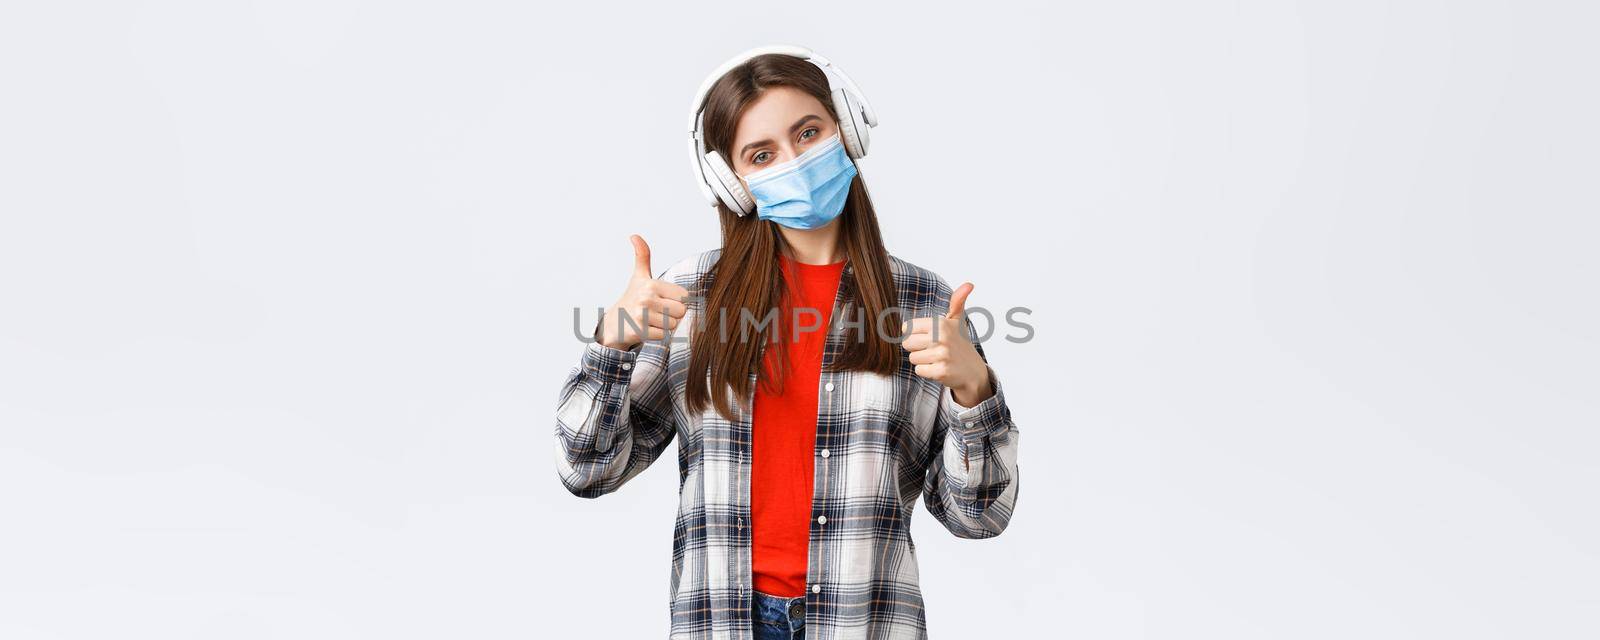 Social distancing, leisure and lifestyle on covid-19 outbreak, coronavirus concept. Pleased good-looking woman in medical mask, listening music headphones, show thumb-up good headsets.